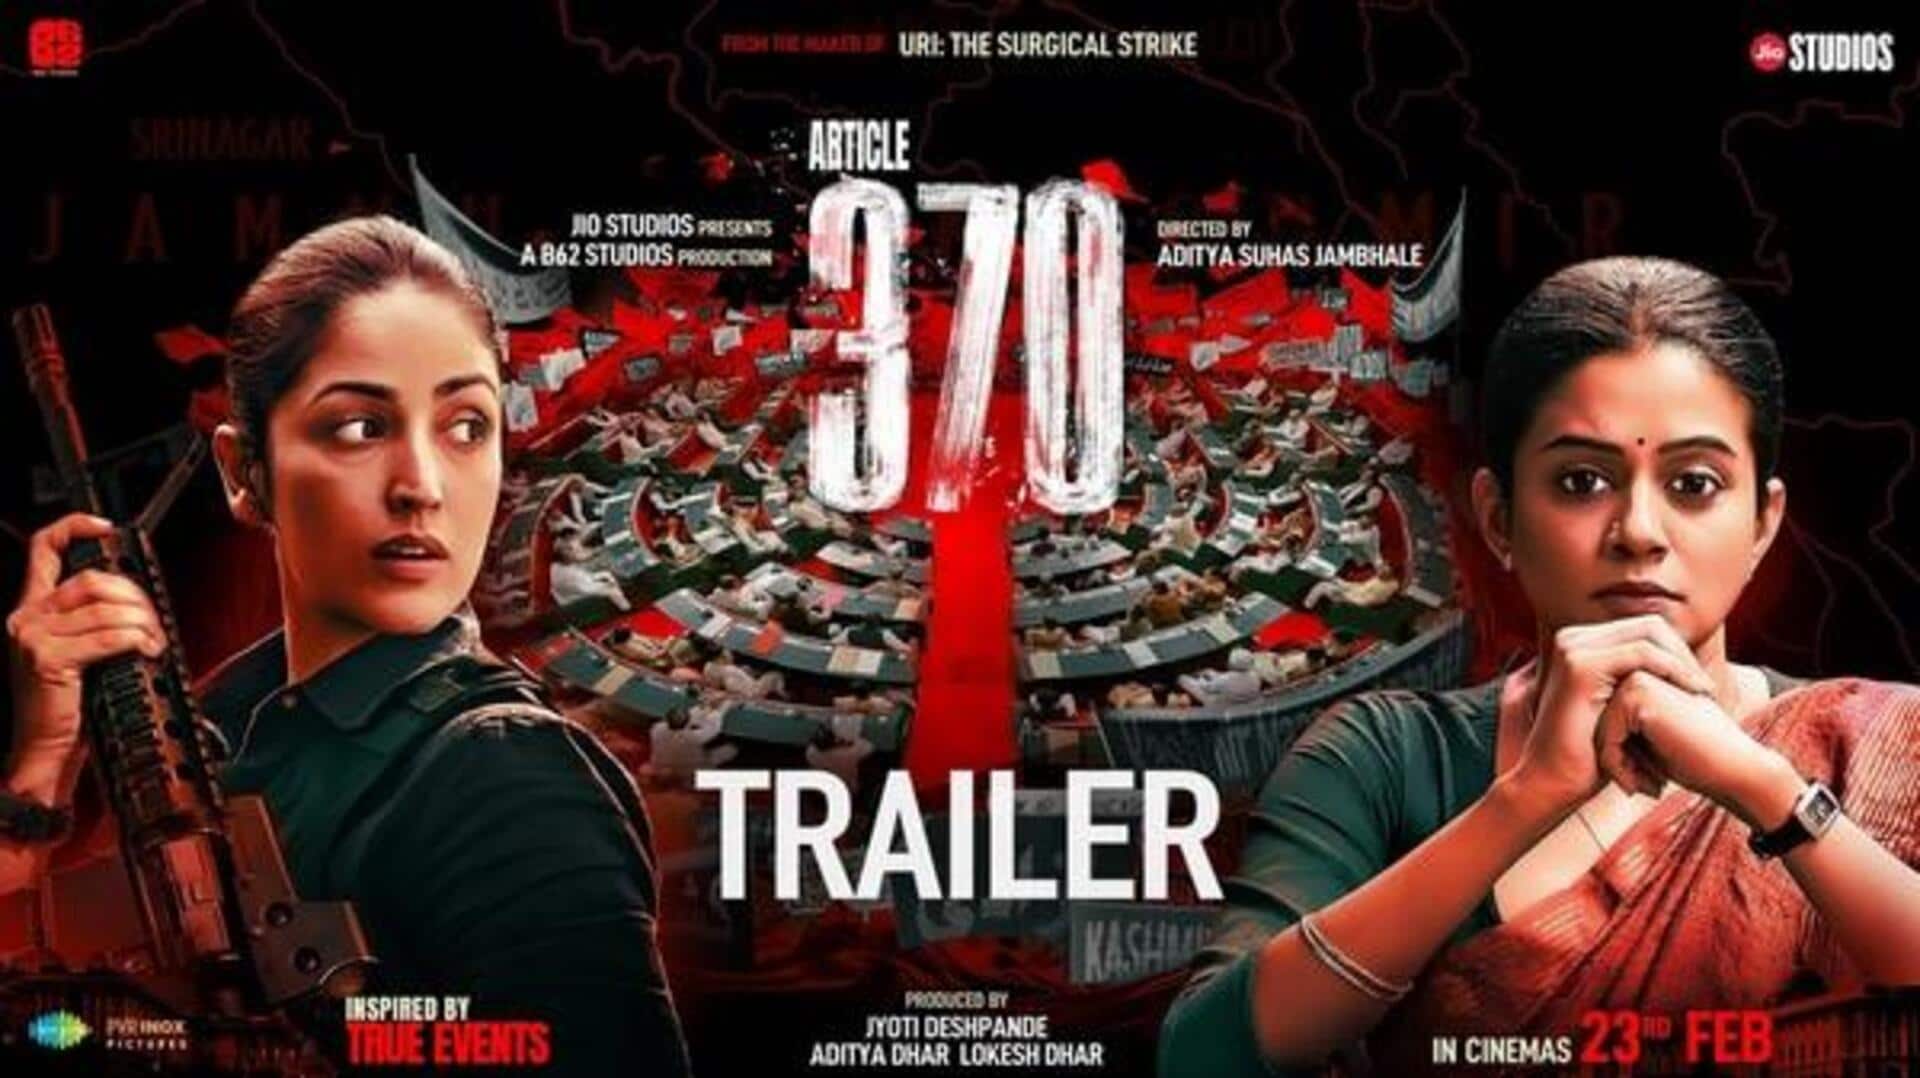 Box office collection: 'Article 370' grows exponentially on opening weekend